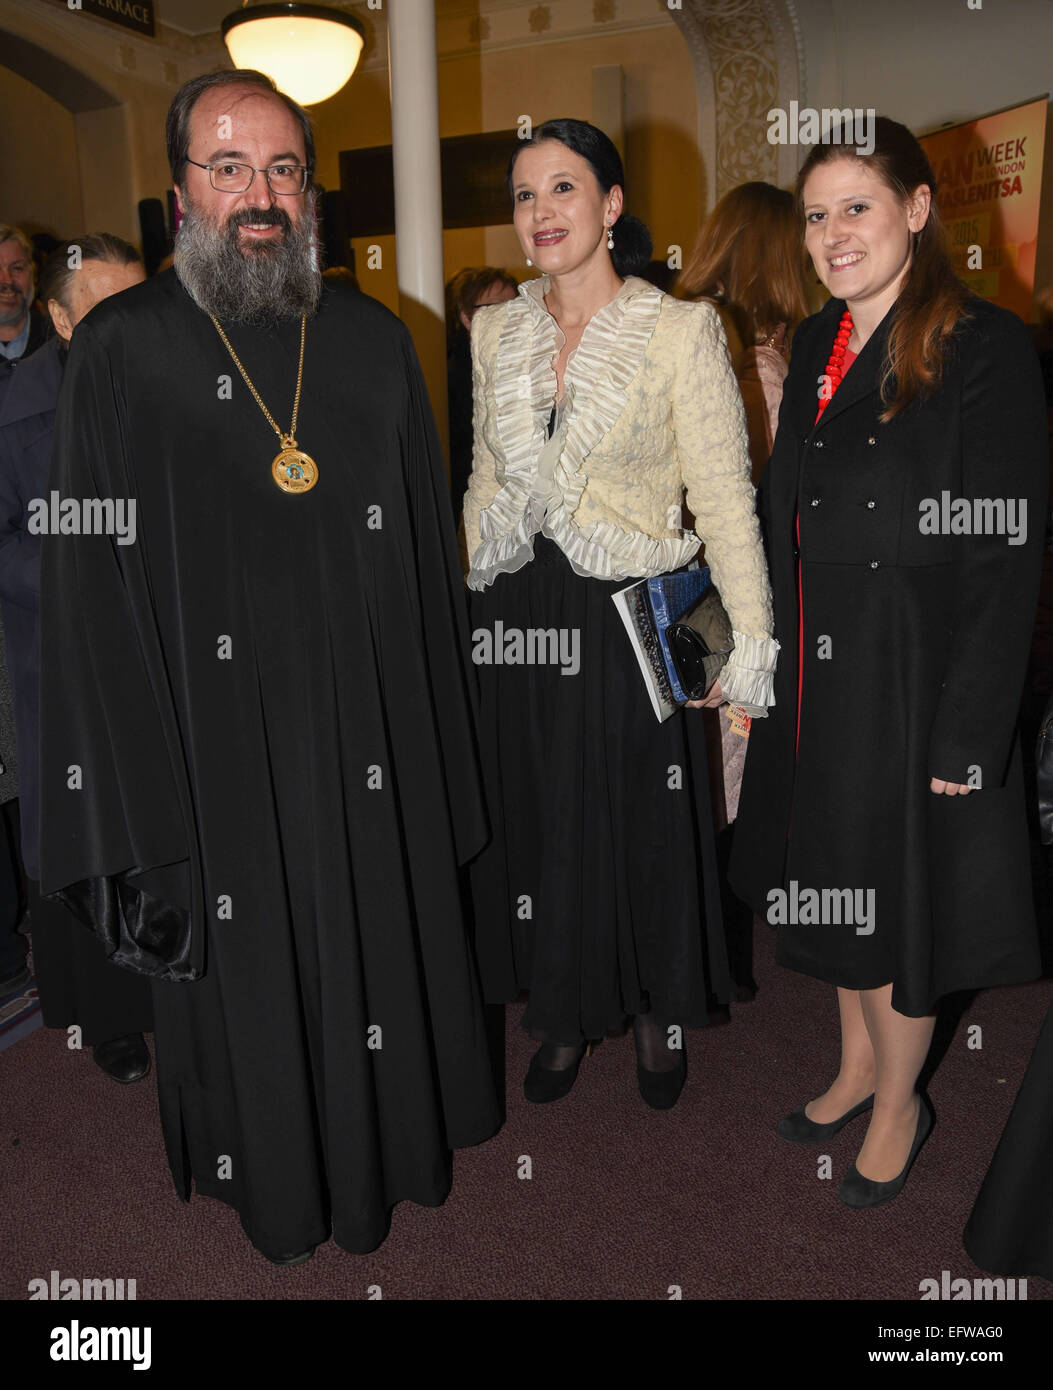 London, UK, 8th February 2015 : His Grace Elisey,Archbishop of Sourozh and Olga Balakleets, CEO, Emsemble Productions attends the Russian Maslenitsa Week 'Oratorio' St Matthew Passion at Cadogan Hall in London. © See Li/Alamy Live News Stock Photo